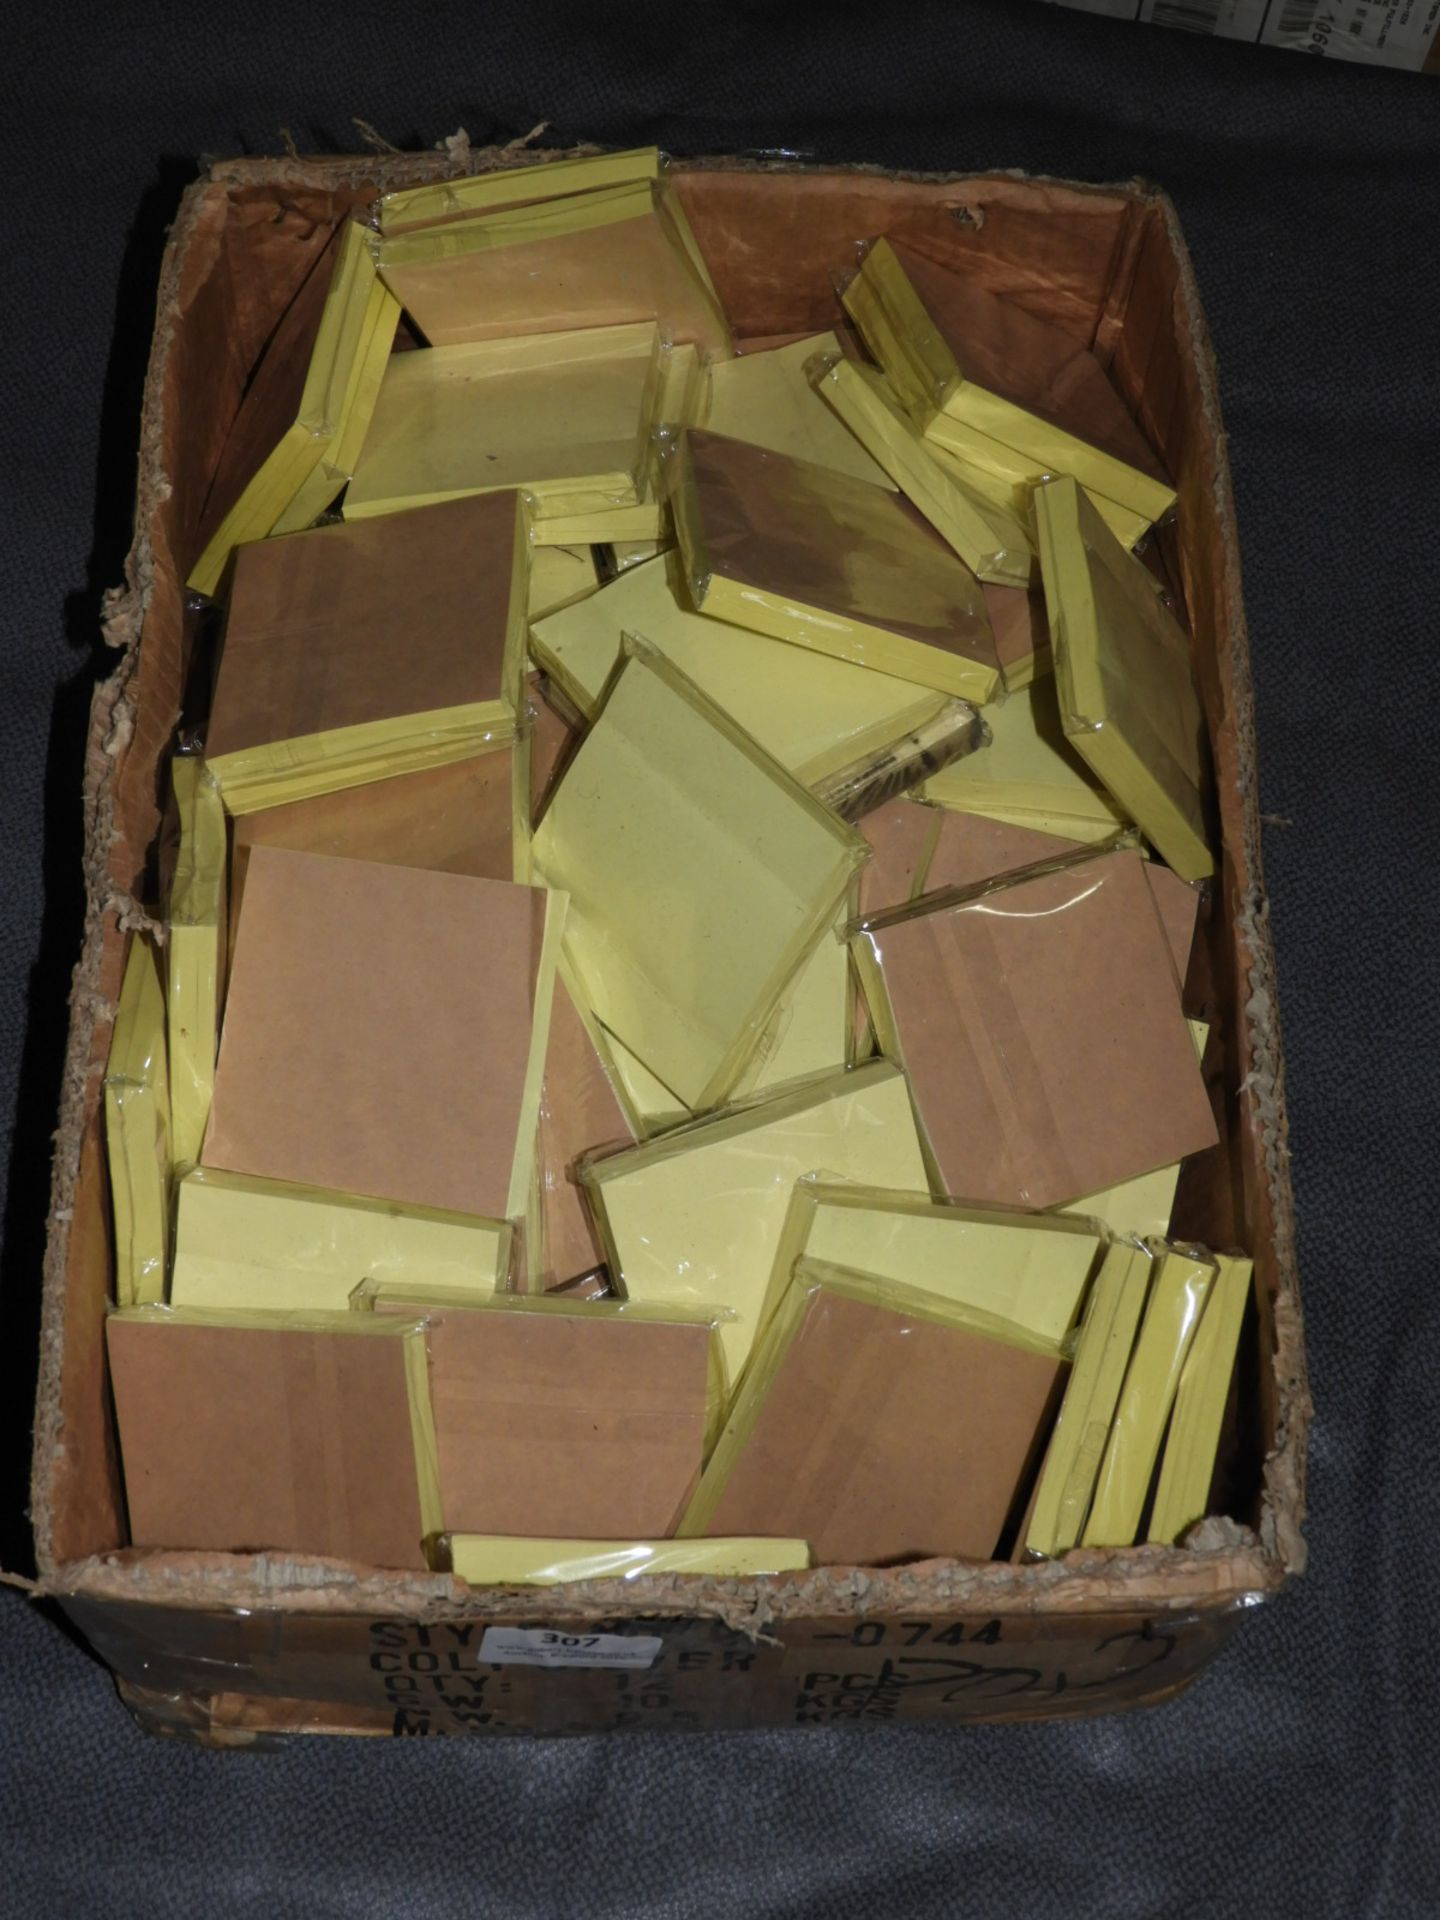 Box Containing a Quantity of Yellow Post-it Notes